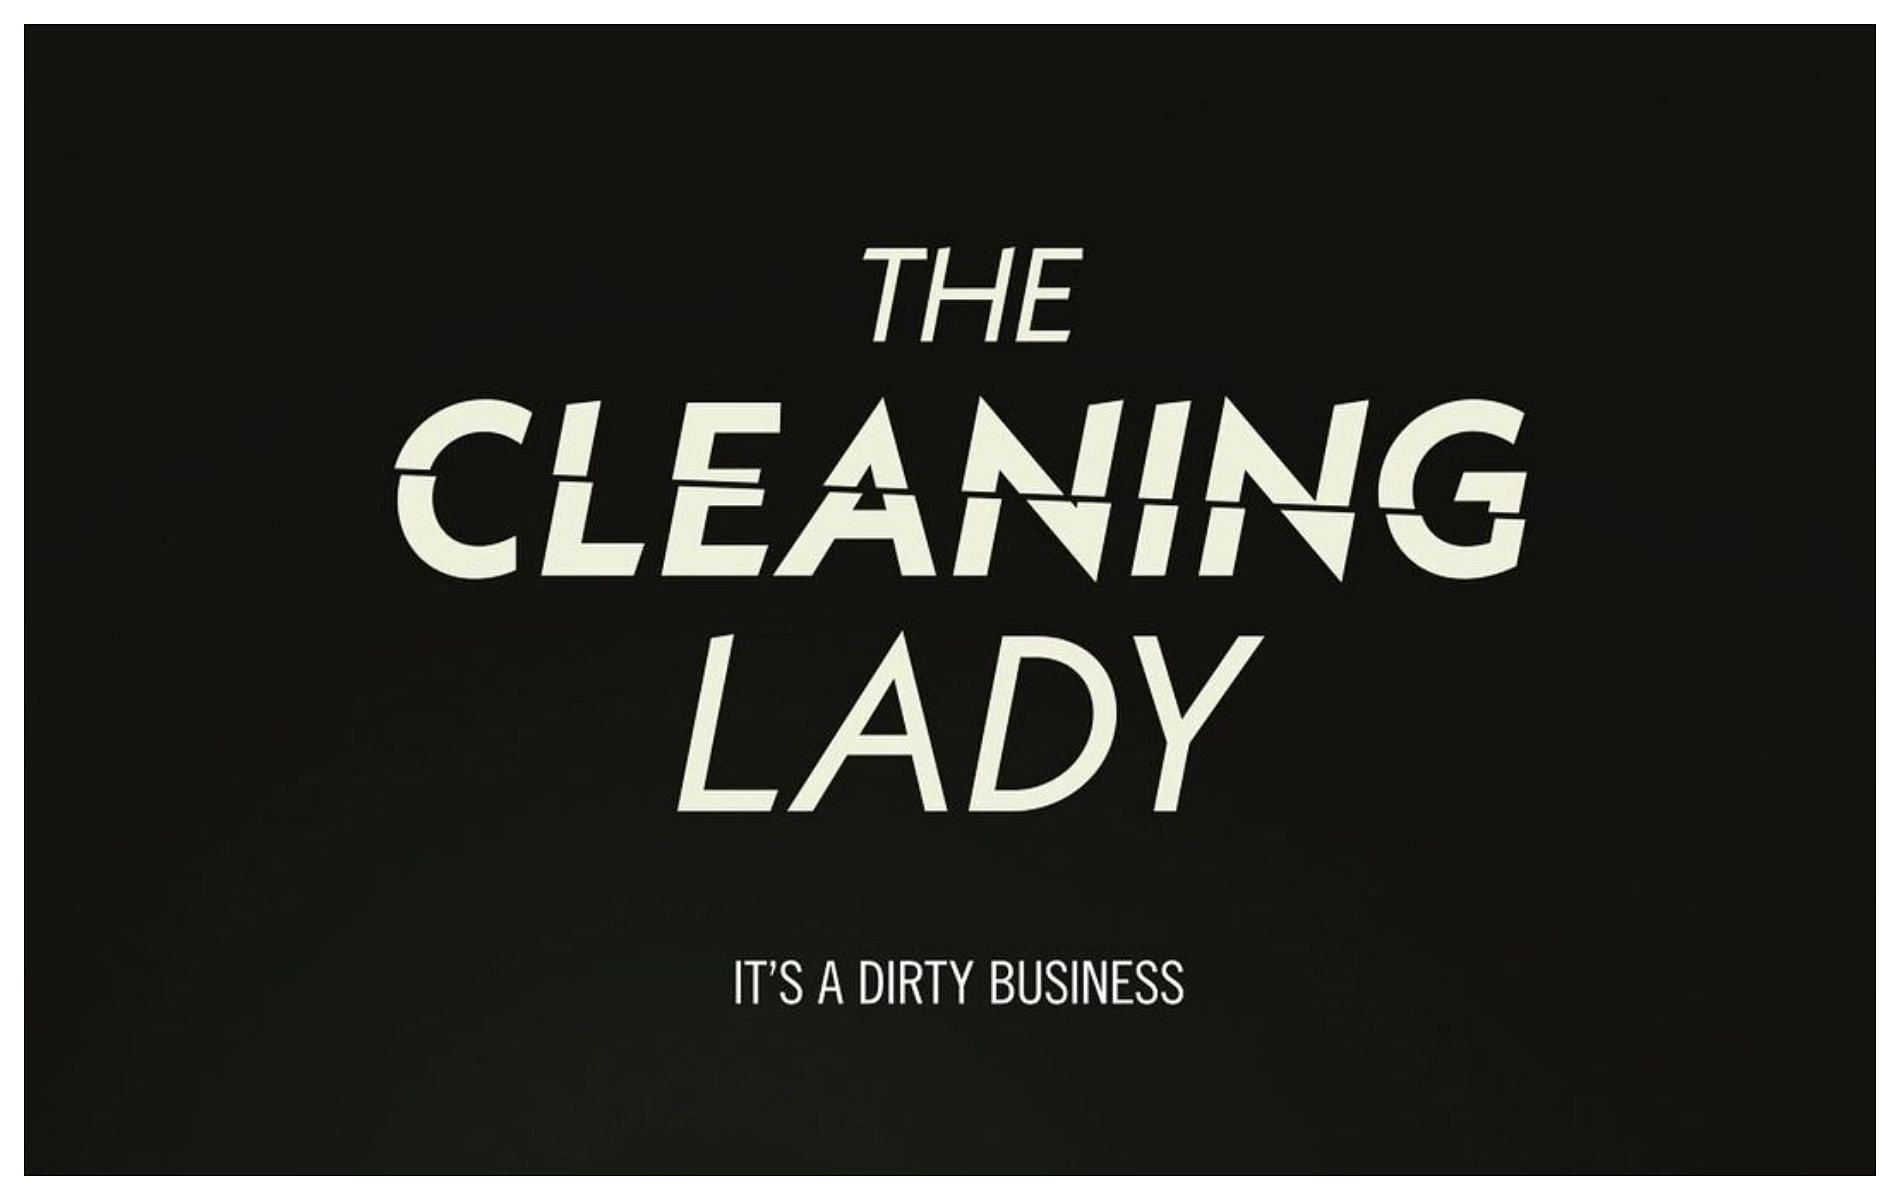 The Cleaning Lady returns for a Season 3. (Image via The Cleaning Lady, Instagram)